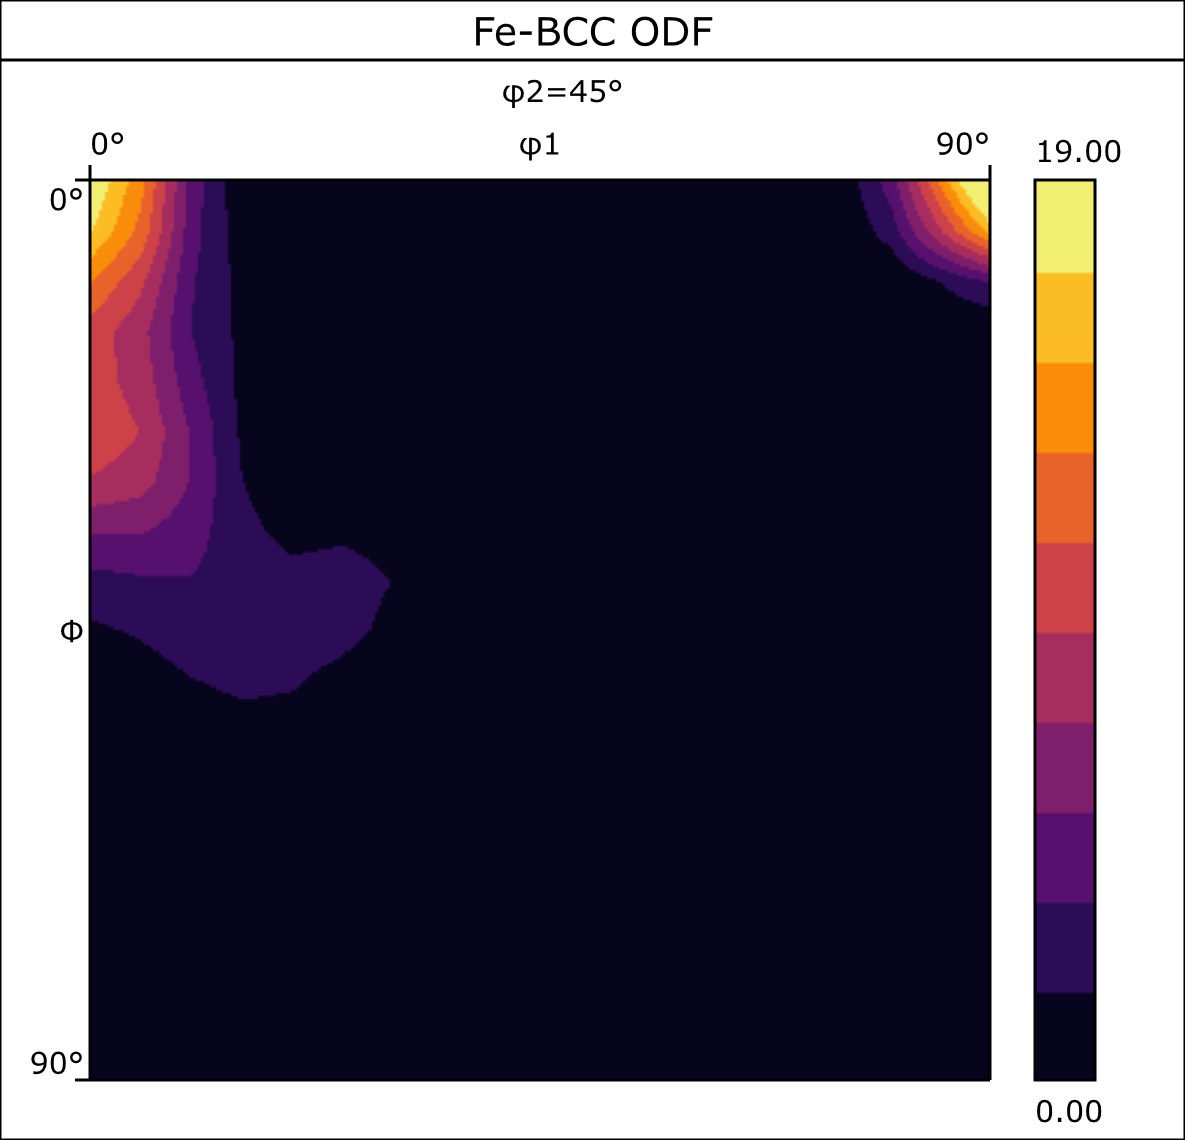 Single φ2=45° section through an ODF from a rolled duplex steel sample for the BCC phase